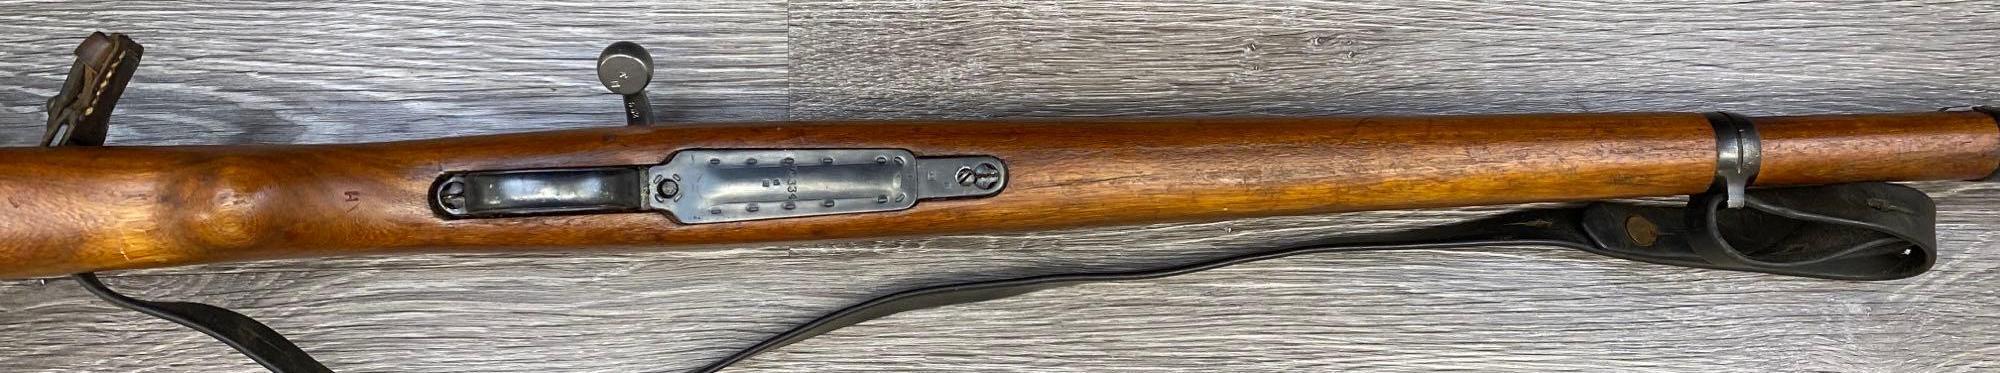 MAUSER MODEL M48A 8MM MAUSER CALIBER BOLT-ACTION RIFLE WITH LEATHER SLING.